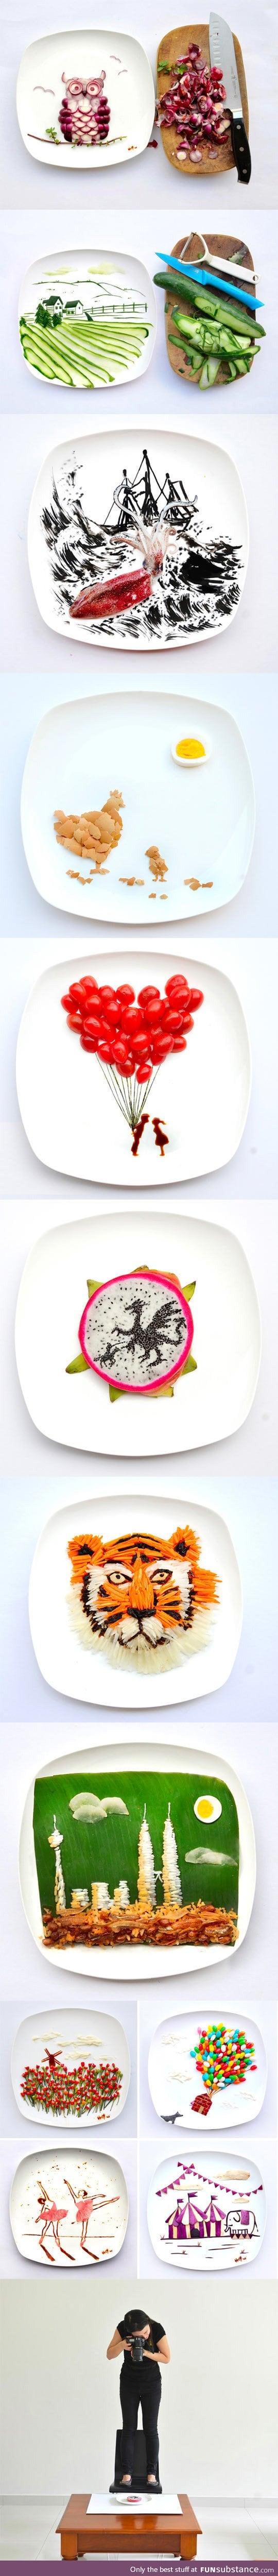 When an artist plays with her food